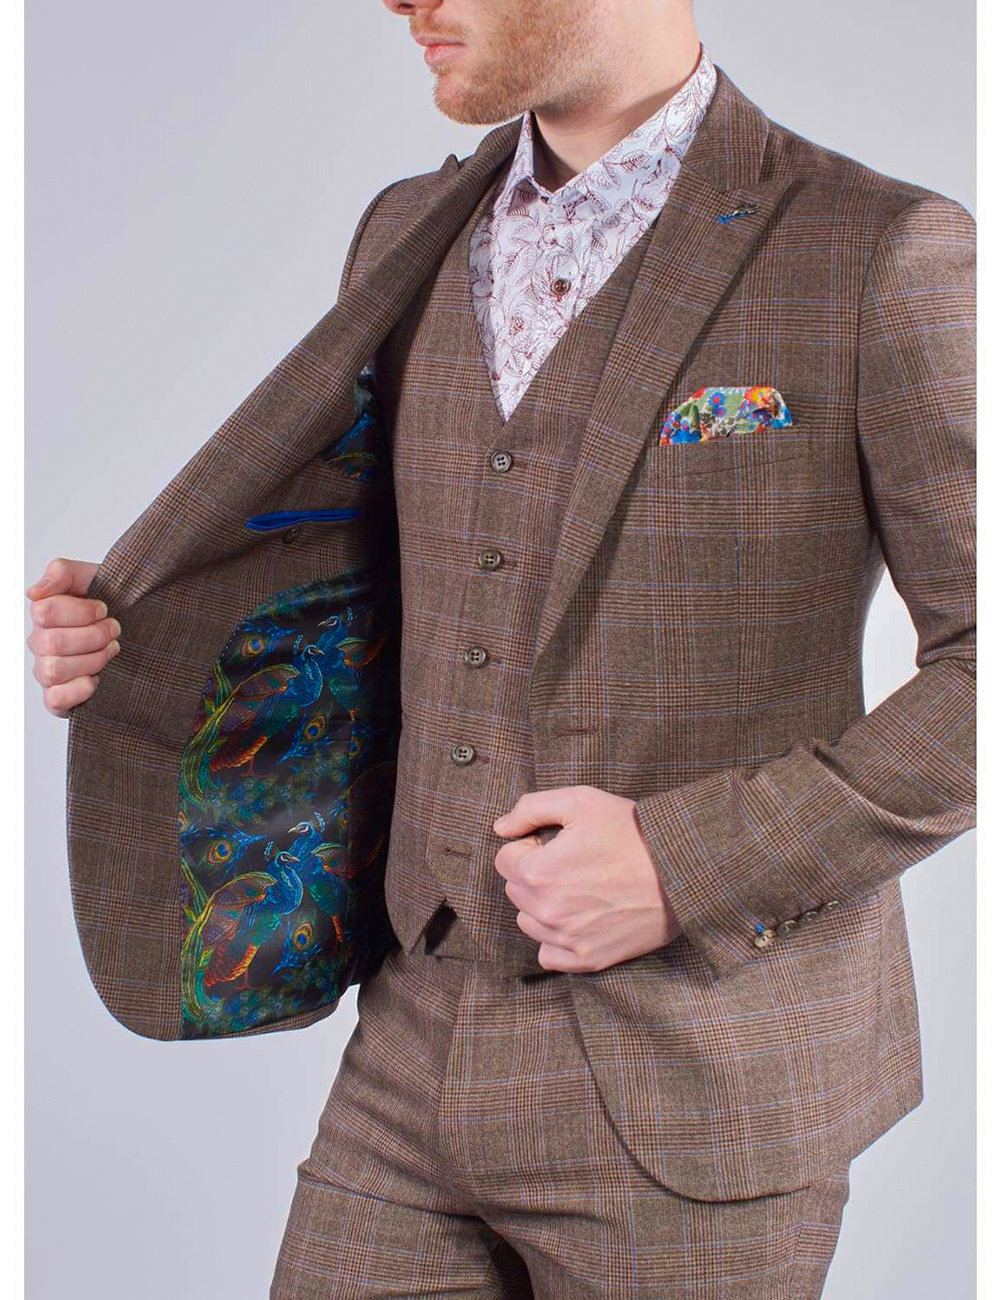 Wearing a brown wool suit, floral shirt, colorful pocket square